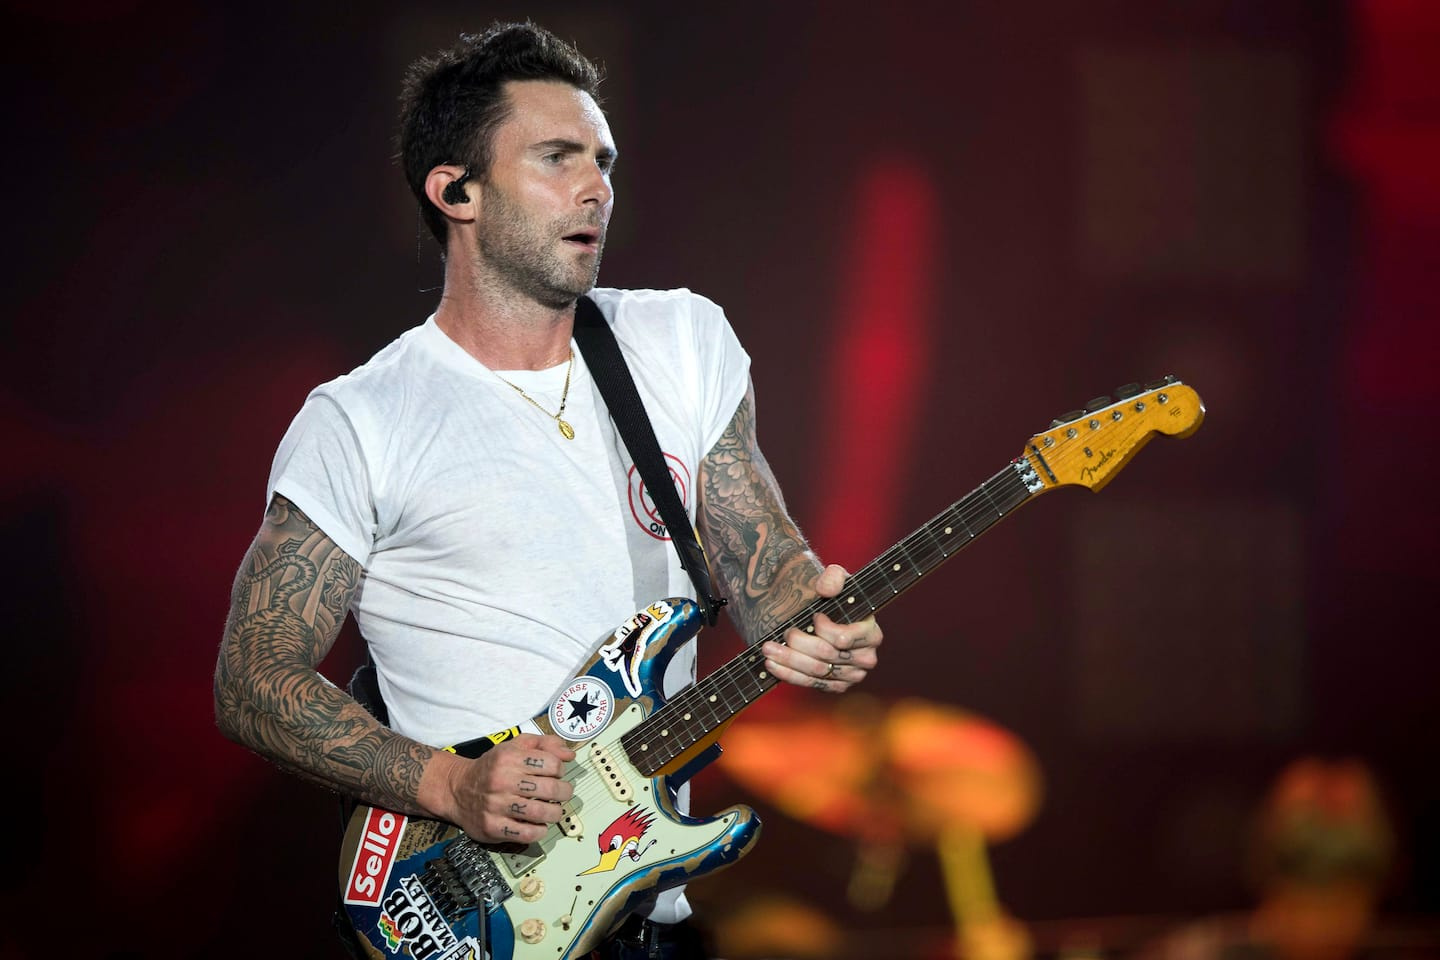 Quebec Summer Festival: an almost unique opportunity to see Maroon 5